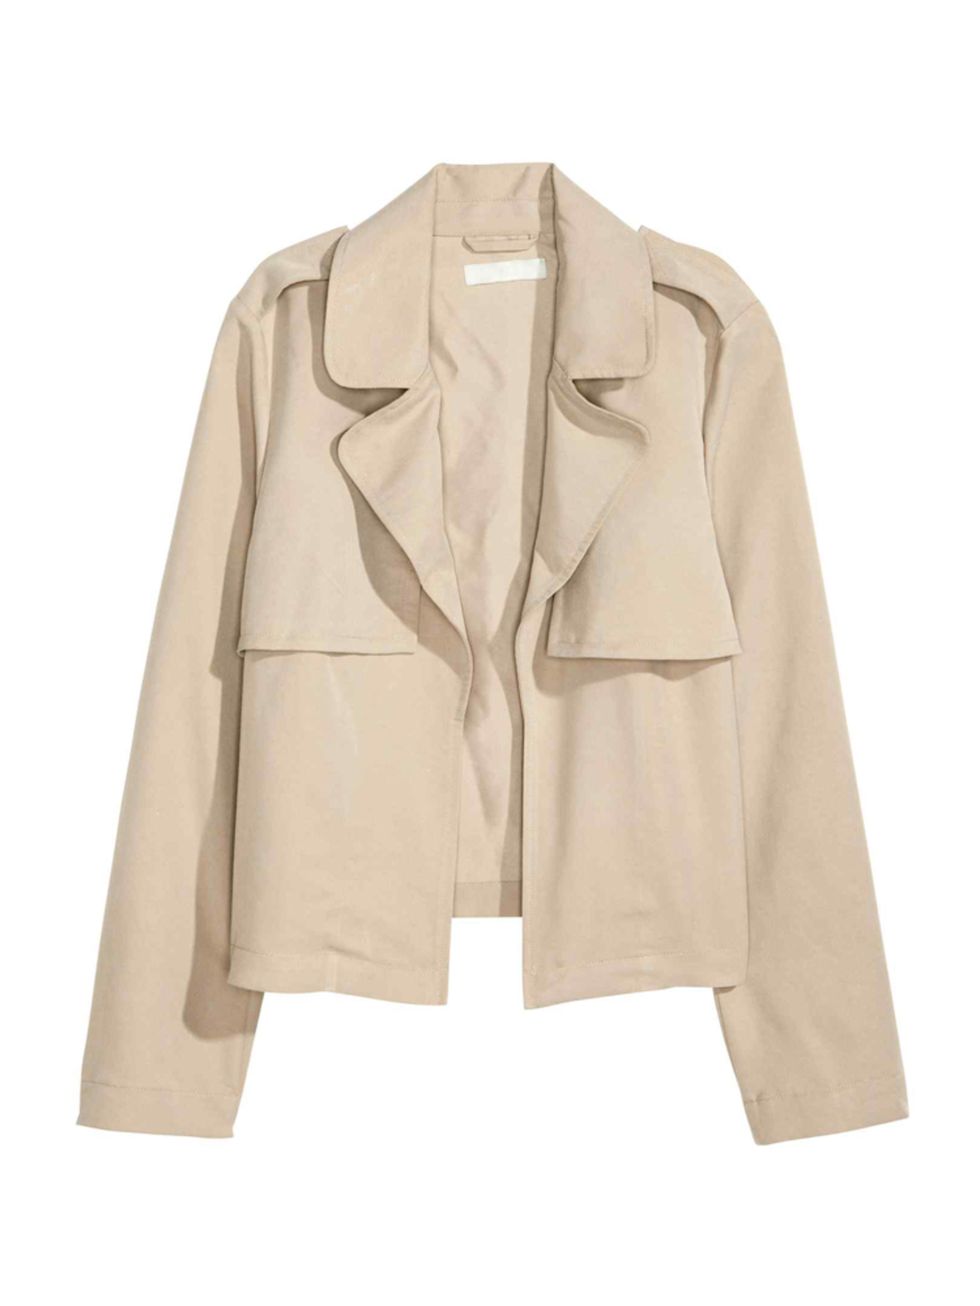 <p>Short trench jacket, <a href="http://www2.hm.com/en_gb/productpage.0383614002.html" target="_blank">£29.99</a></p>